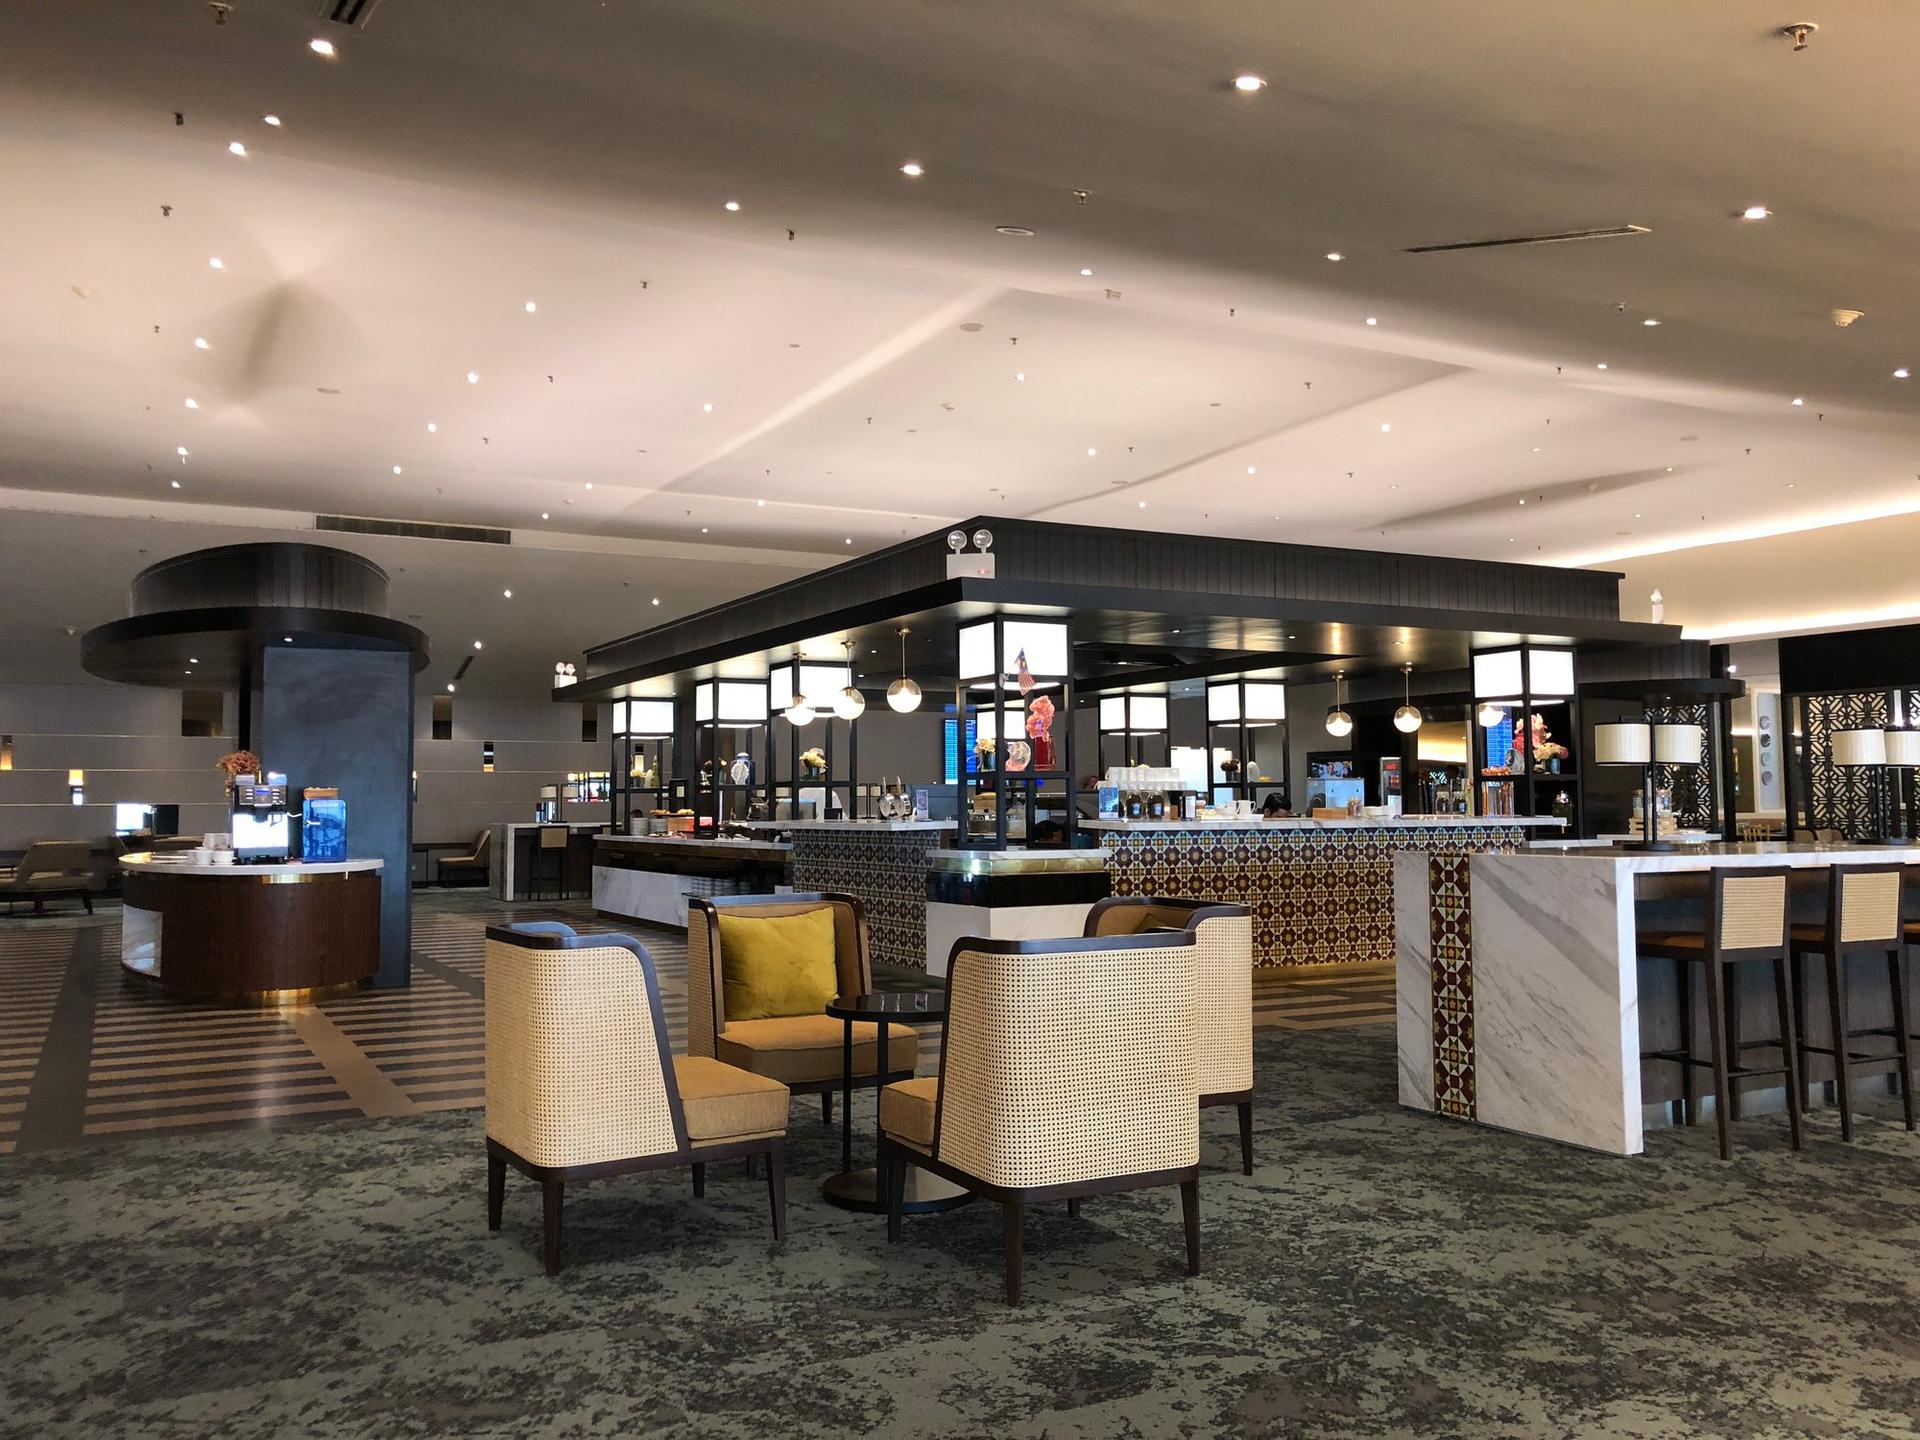 Malaysia Airlines Golden Business Class Lounge image 14 of 27